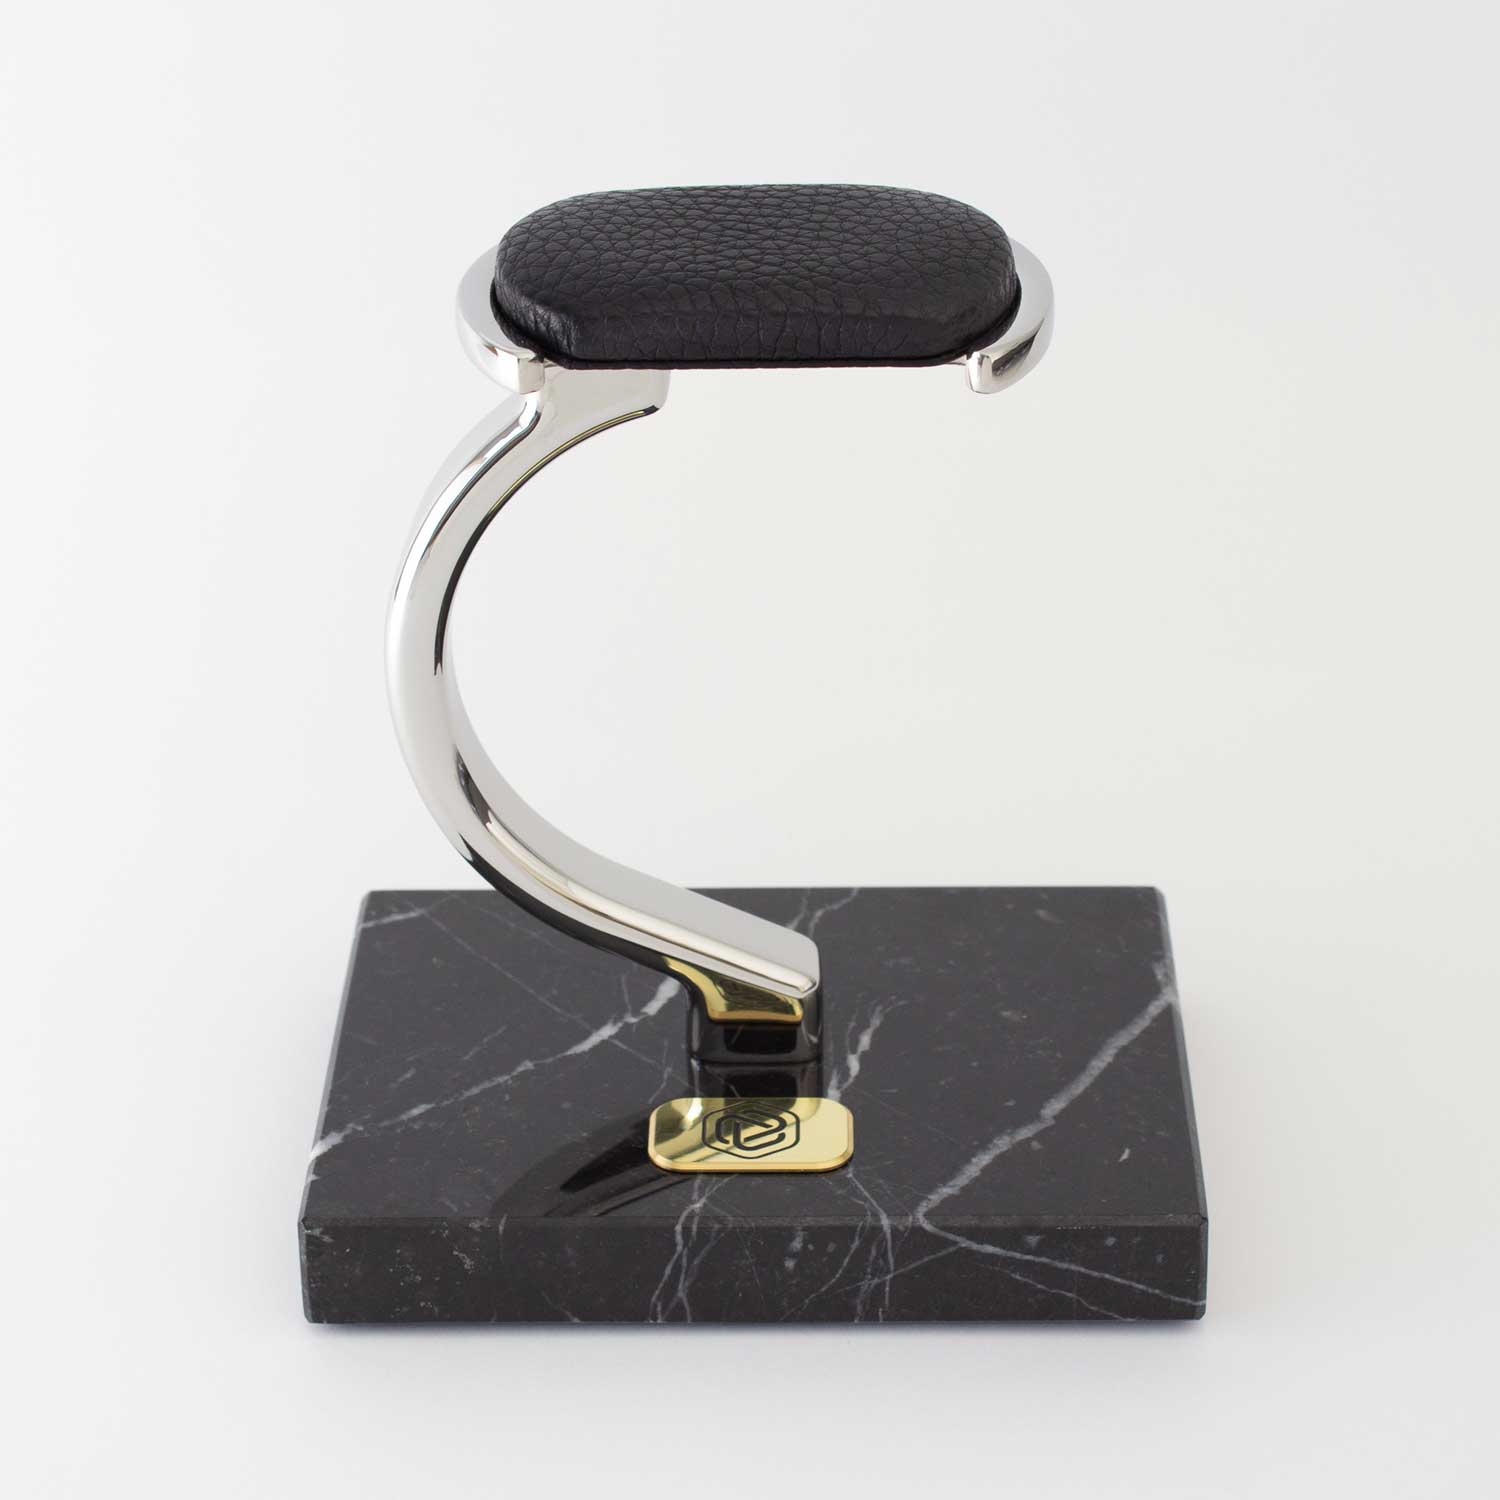 The Chronobay Watch Stand